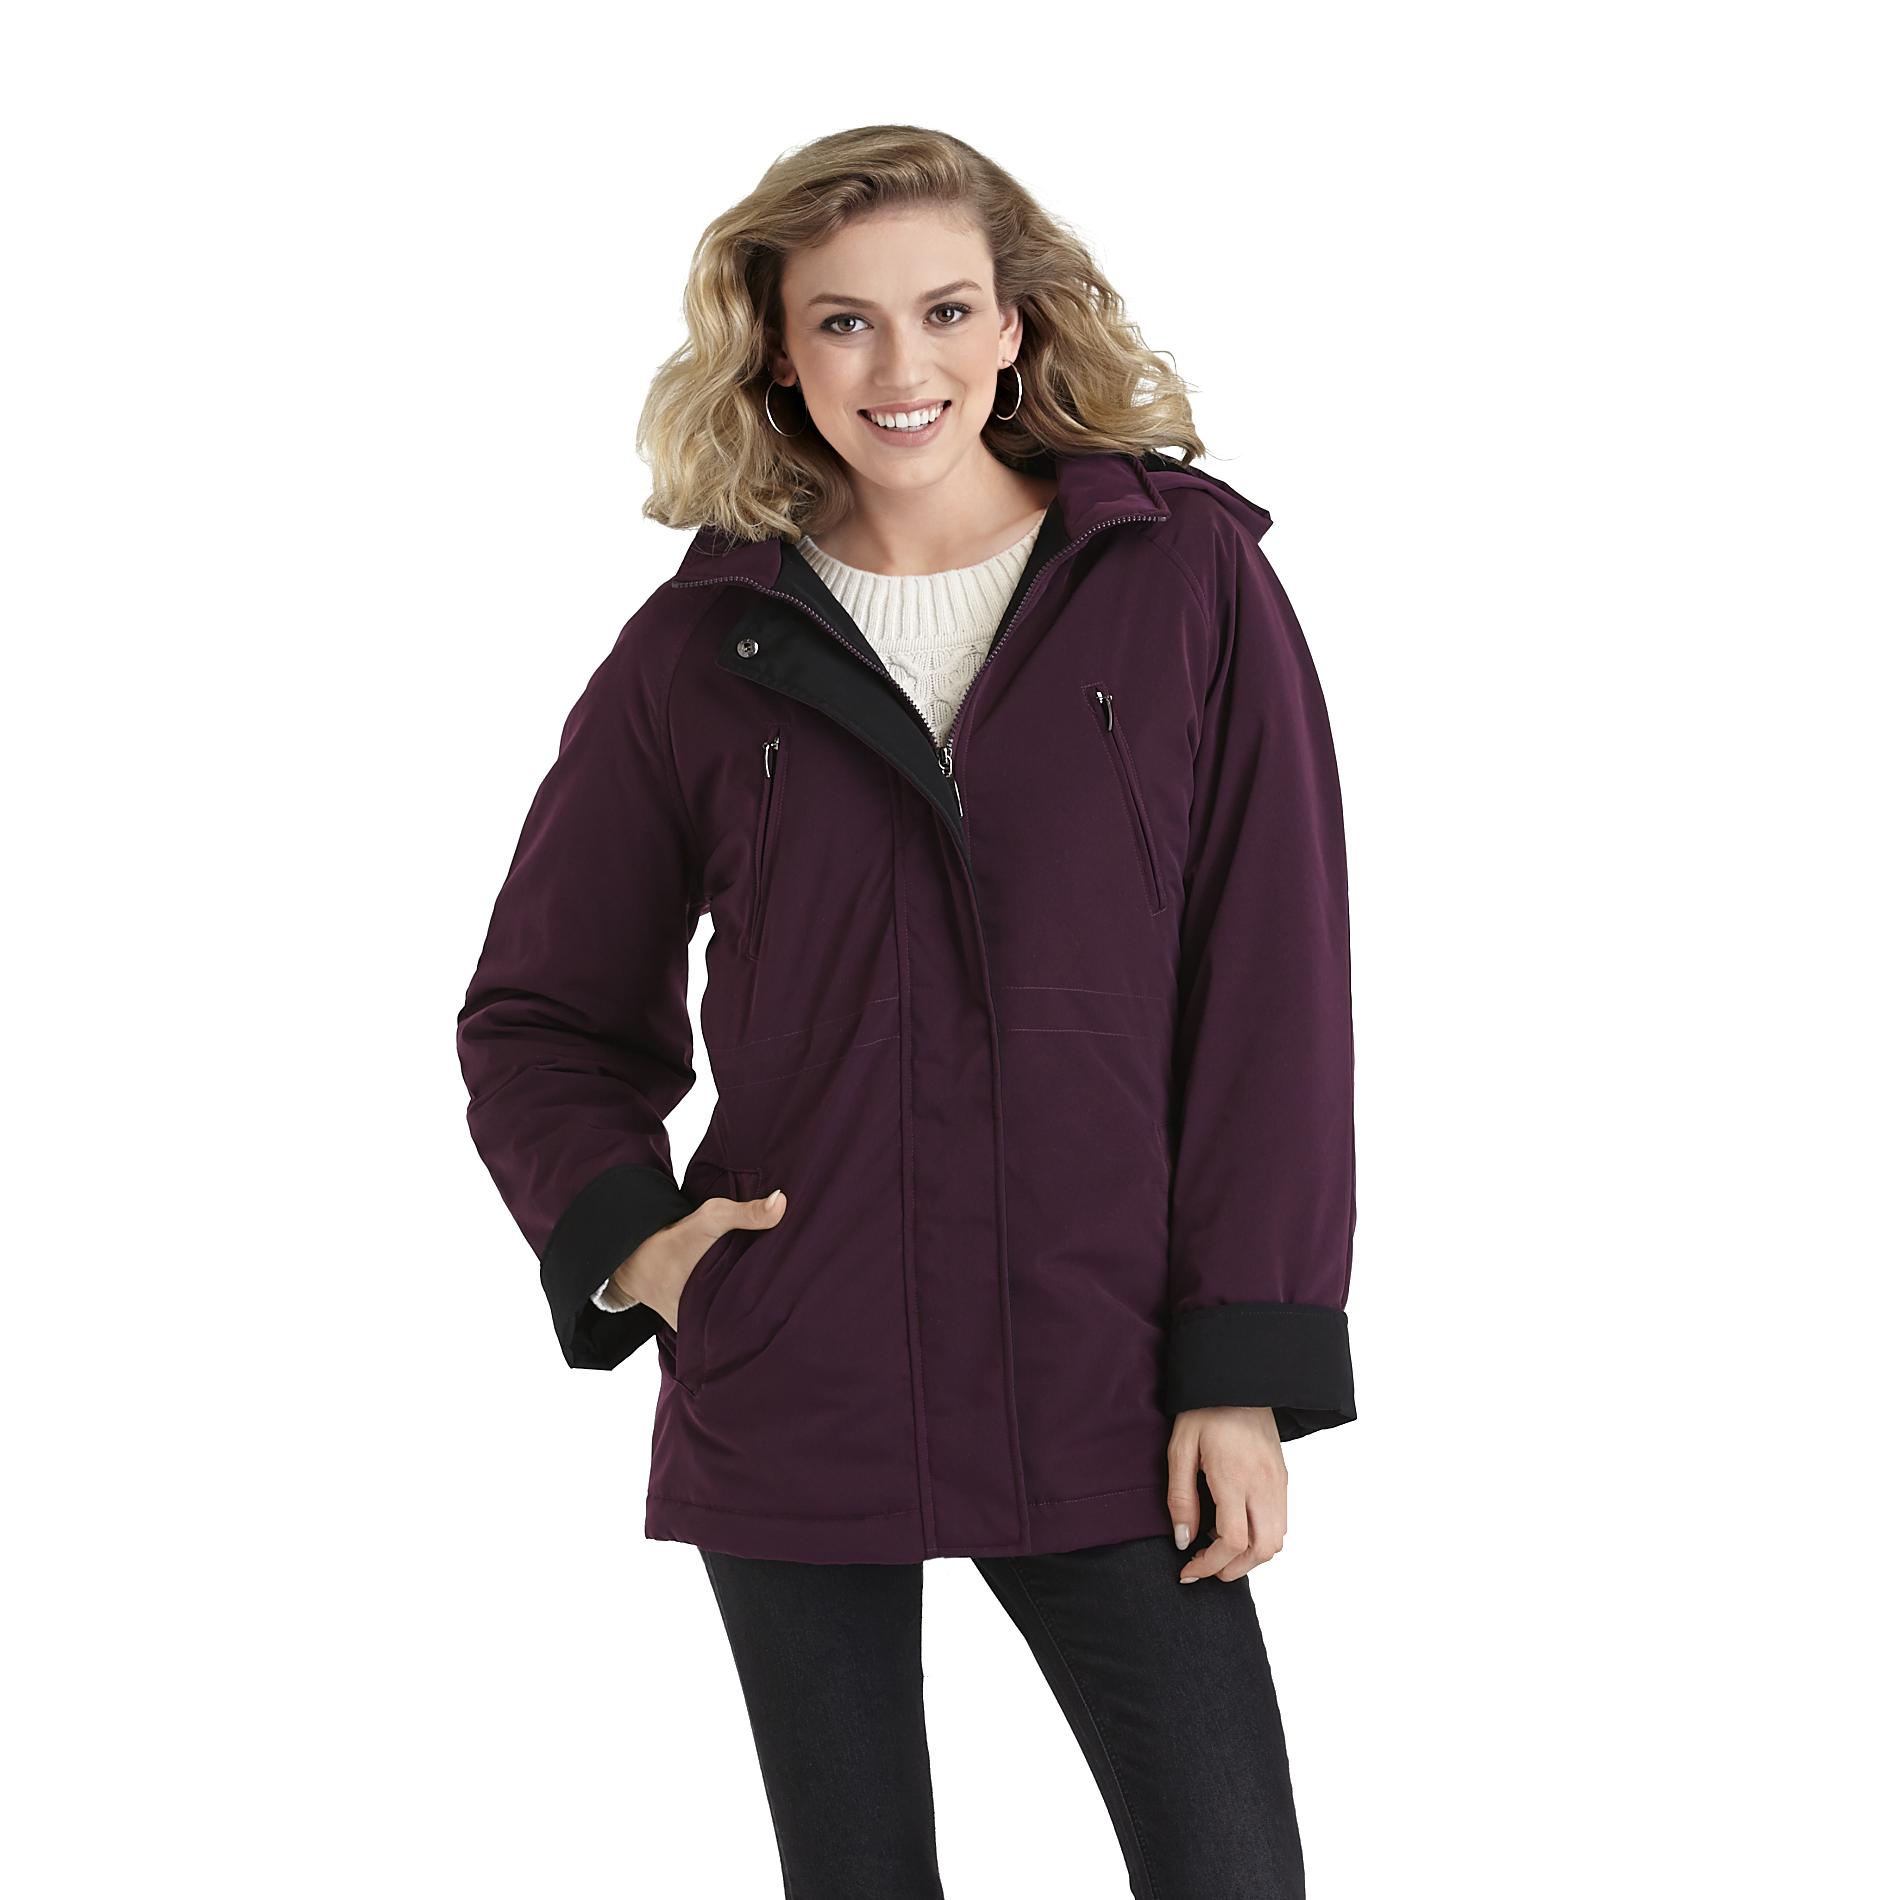 Basic Editions Women's Hooded Jacket